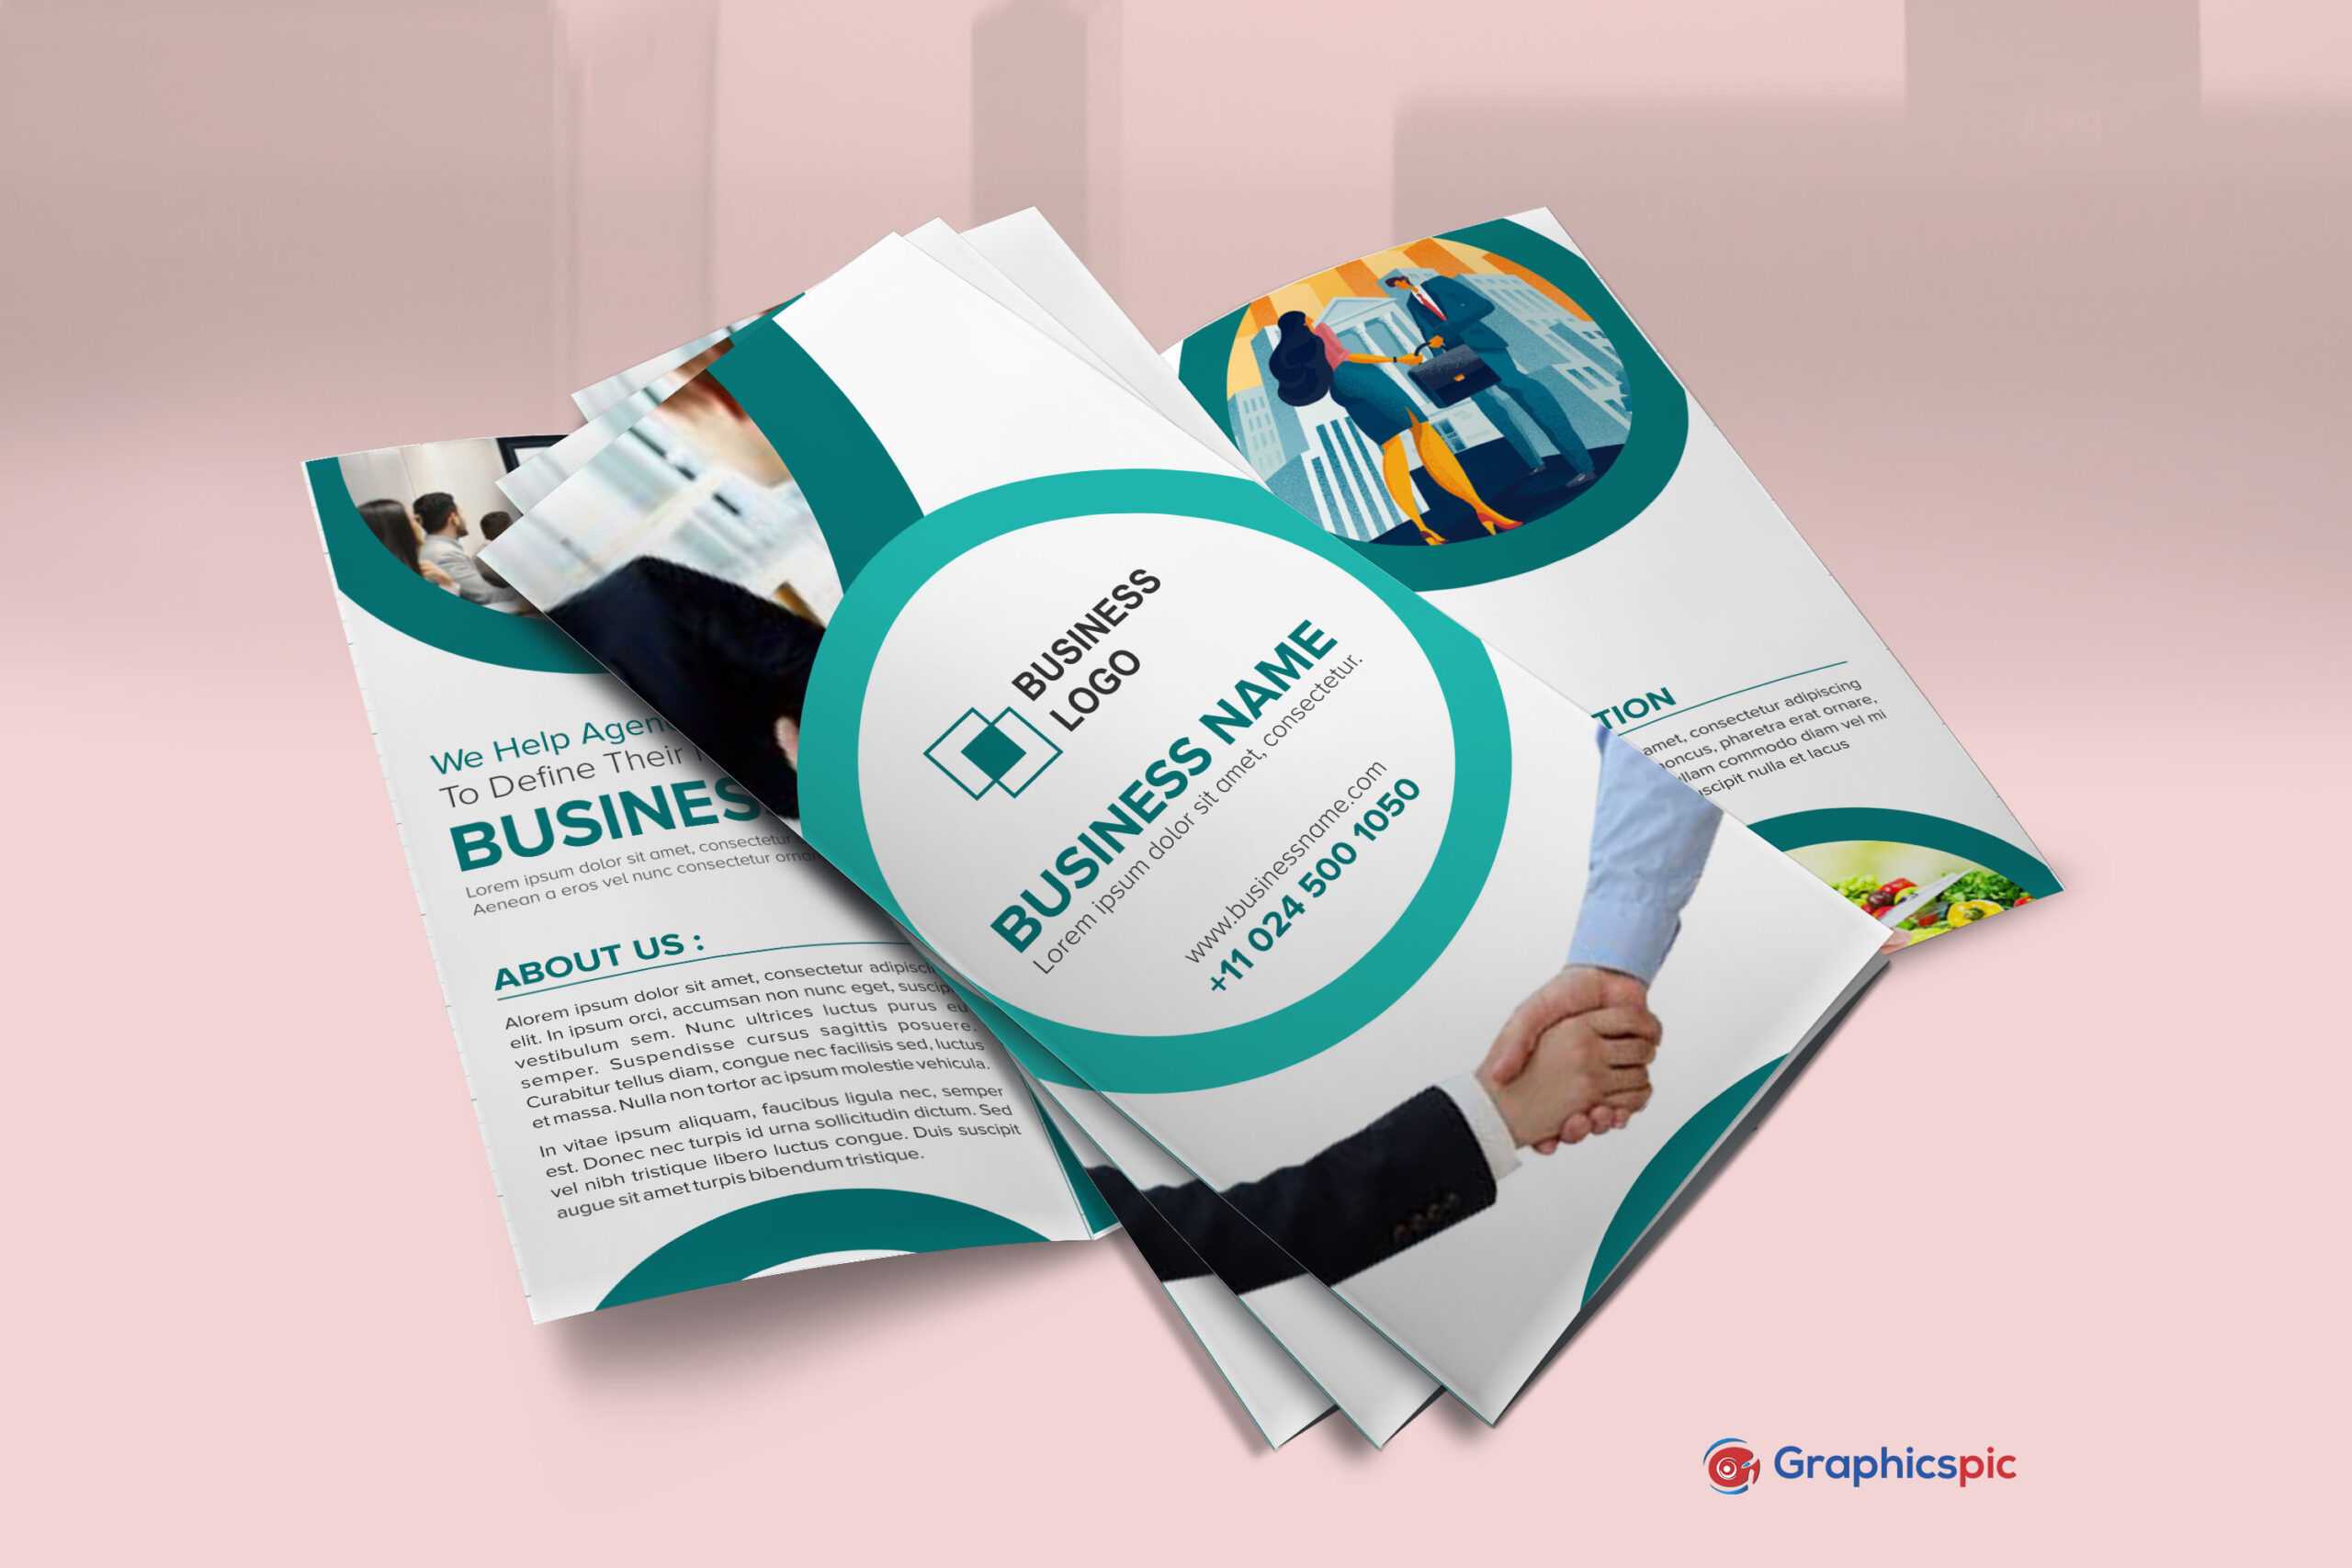 Free Download Brochure Templates Design For Events, Products Inside Creative Brochure Templates Free Download